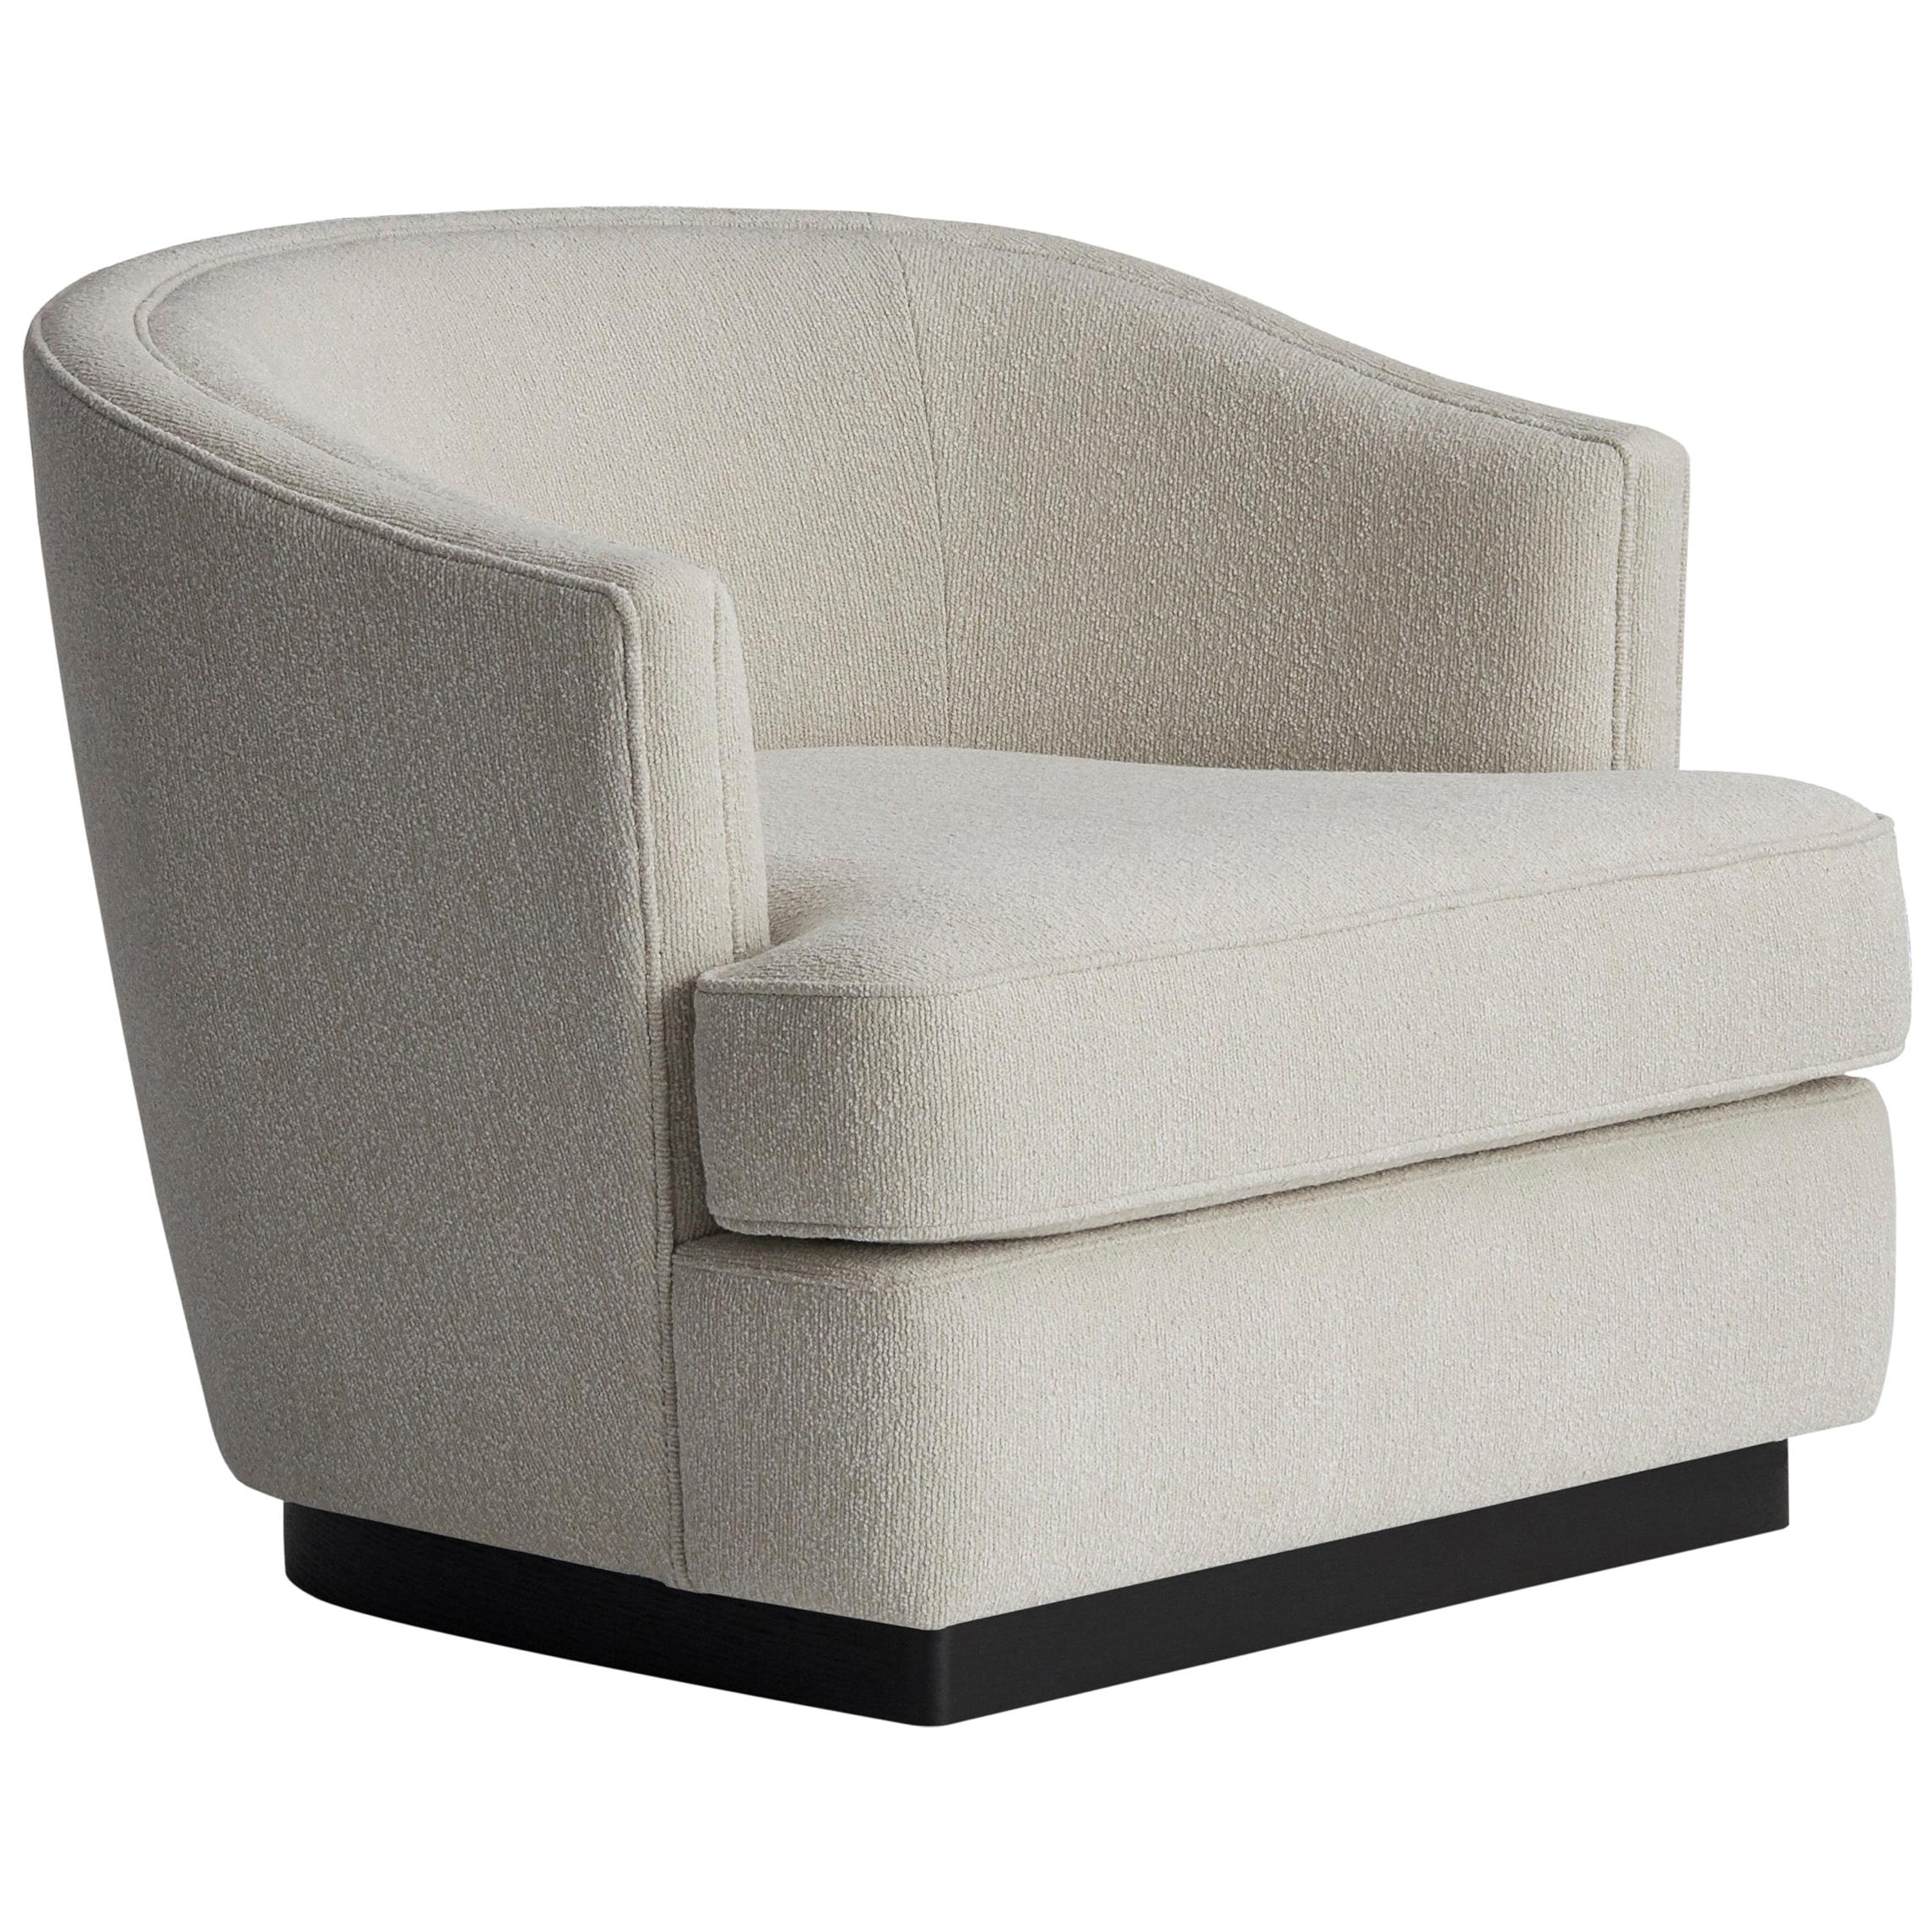 ROMANA lounge chair in white boucle fabric